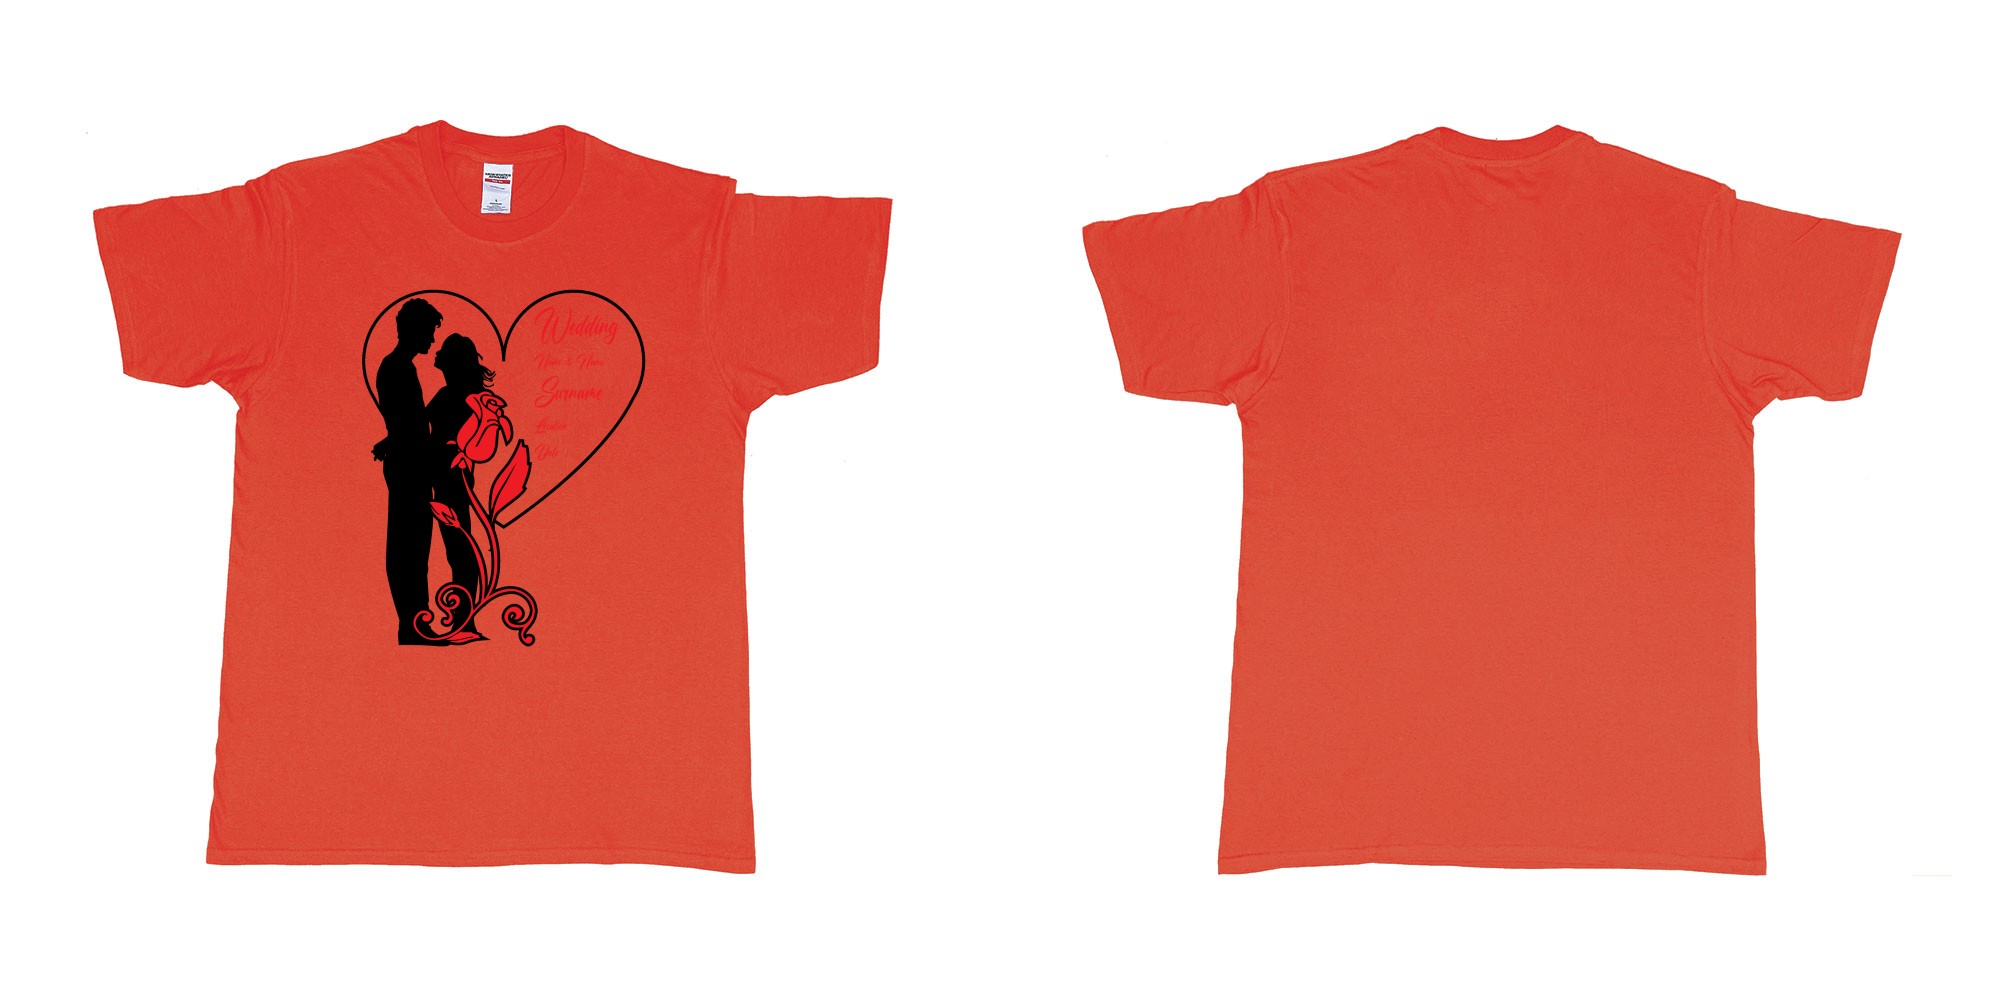 Custom tshirt design wedding couple rose heart in fabric color red choice your own text made in Bali by The Pirate Way